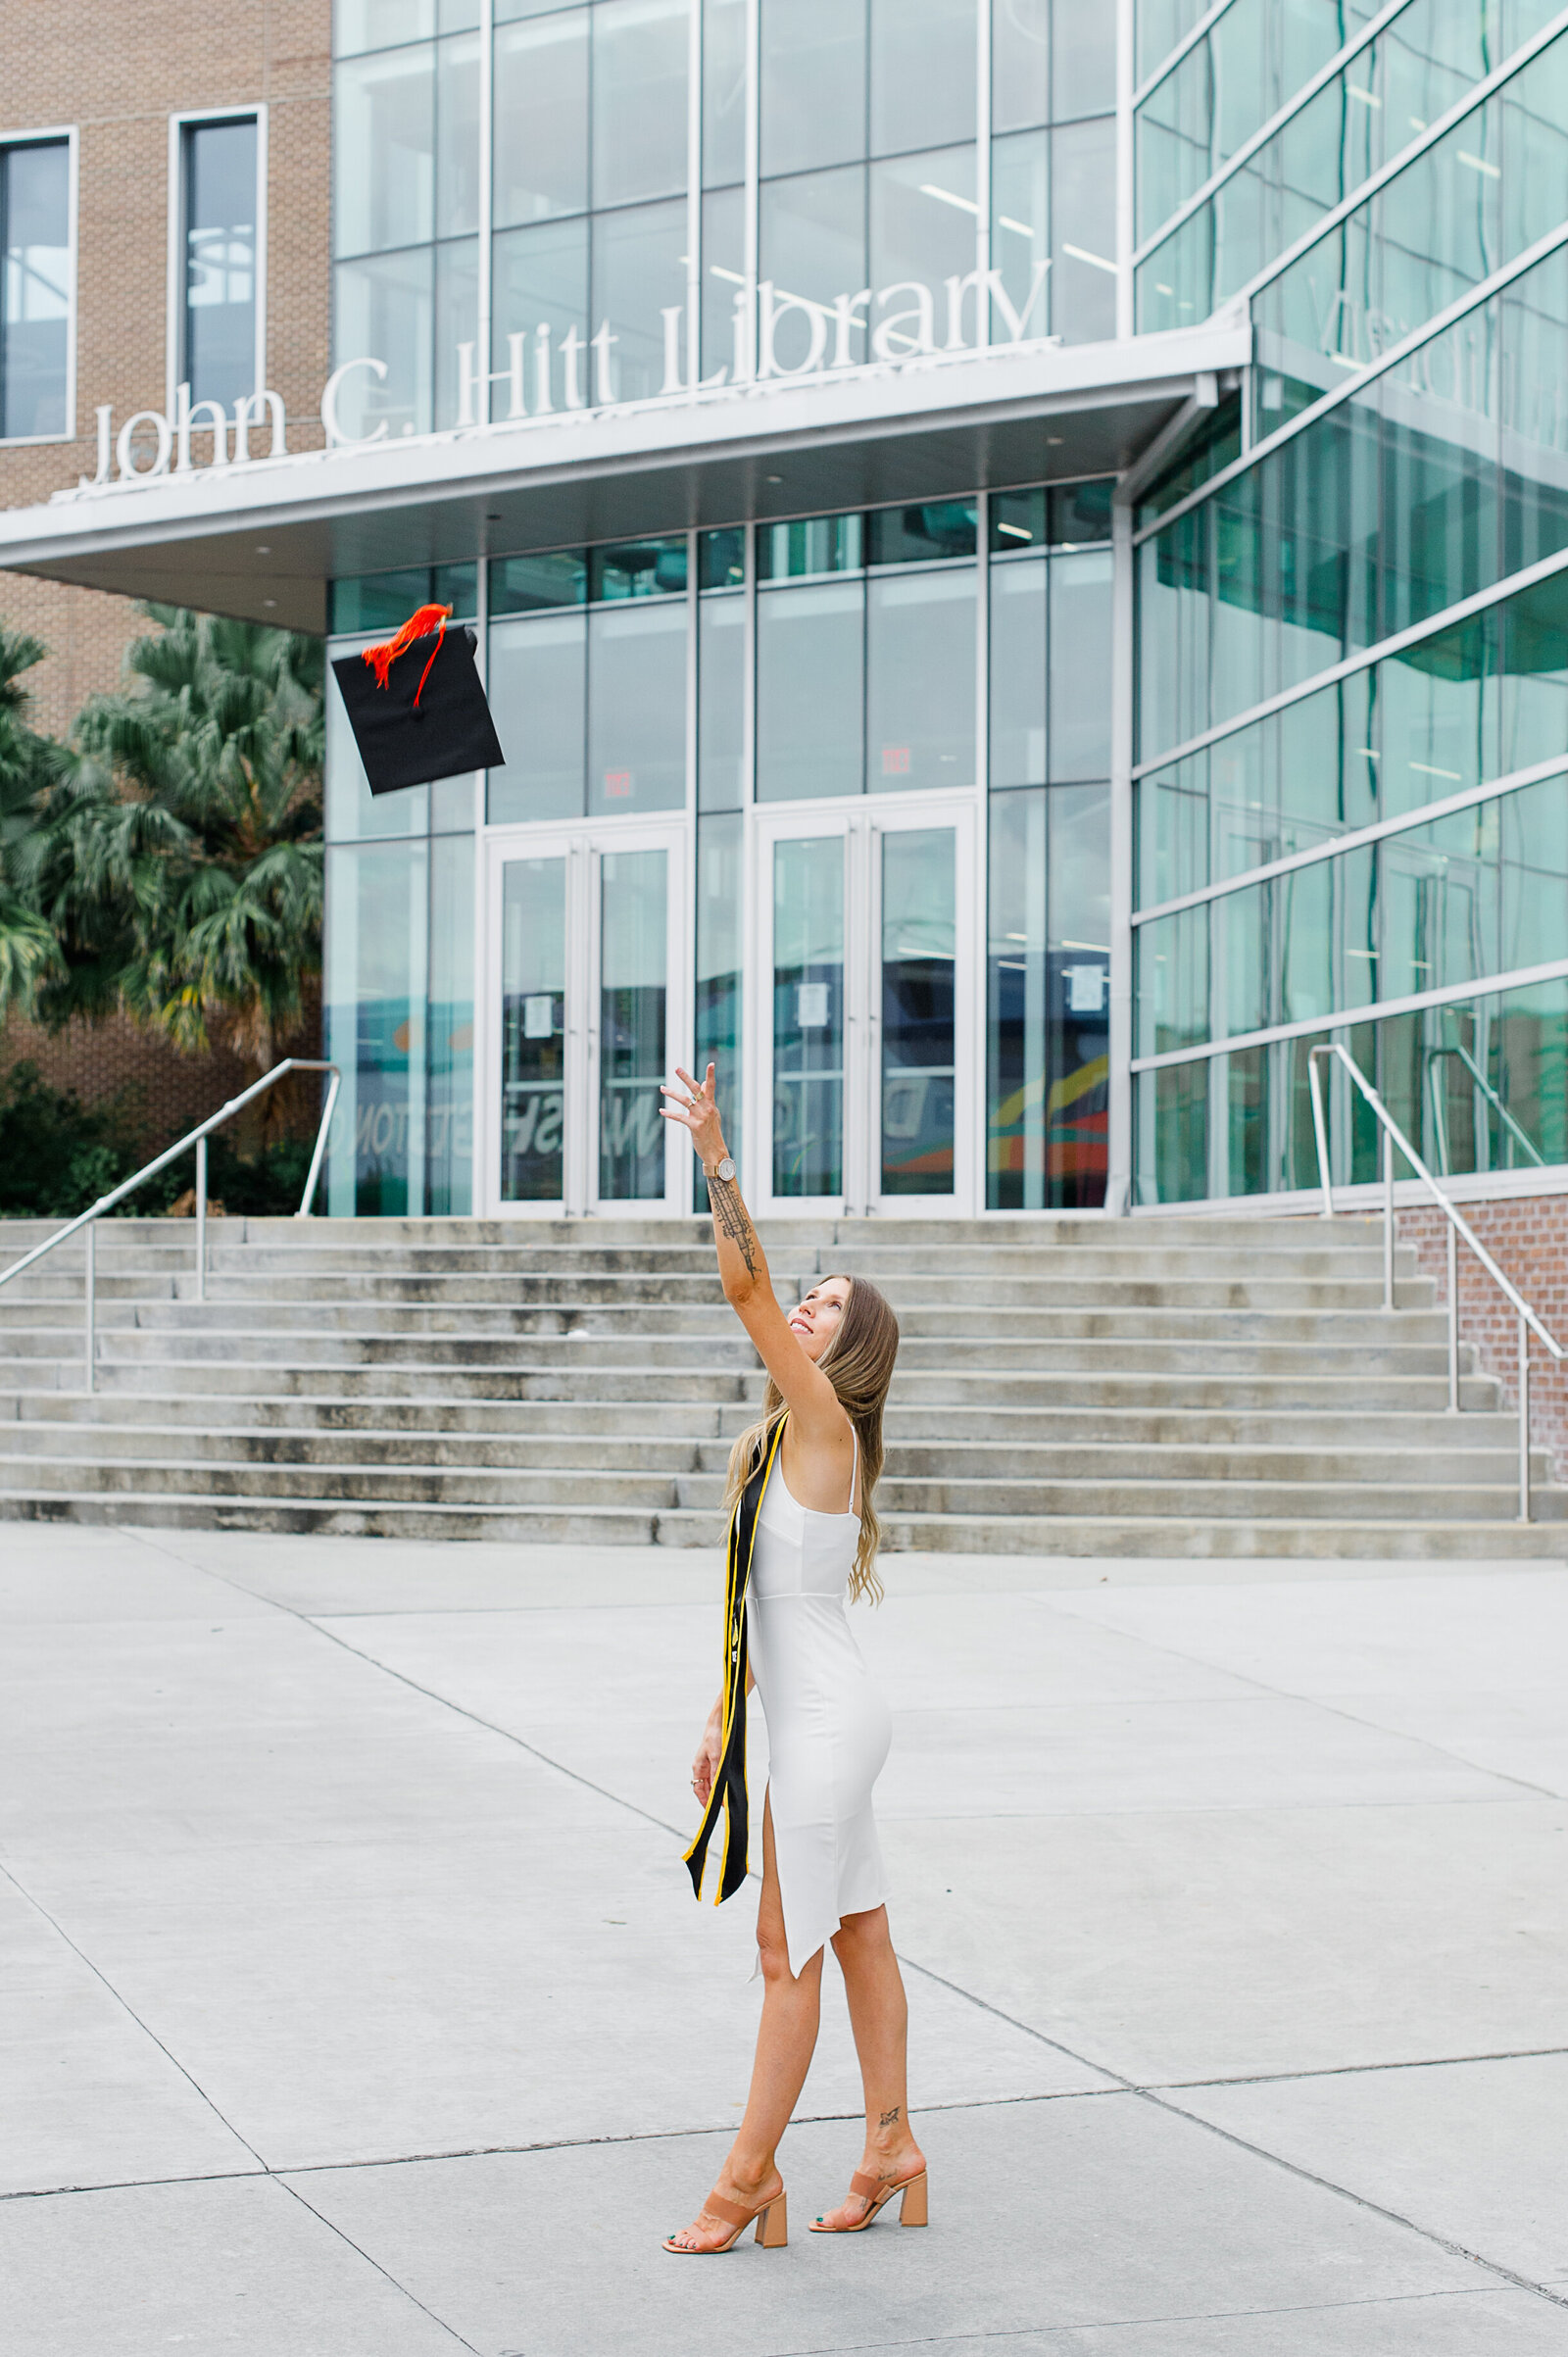 UCF senior girl stands in front of Joh C Hitt Library and throws her cap